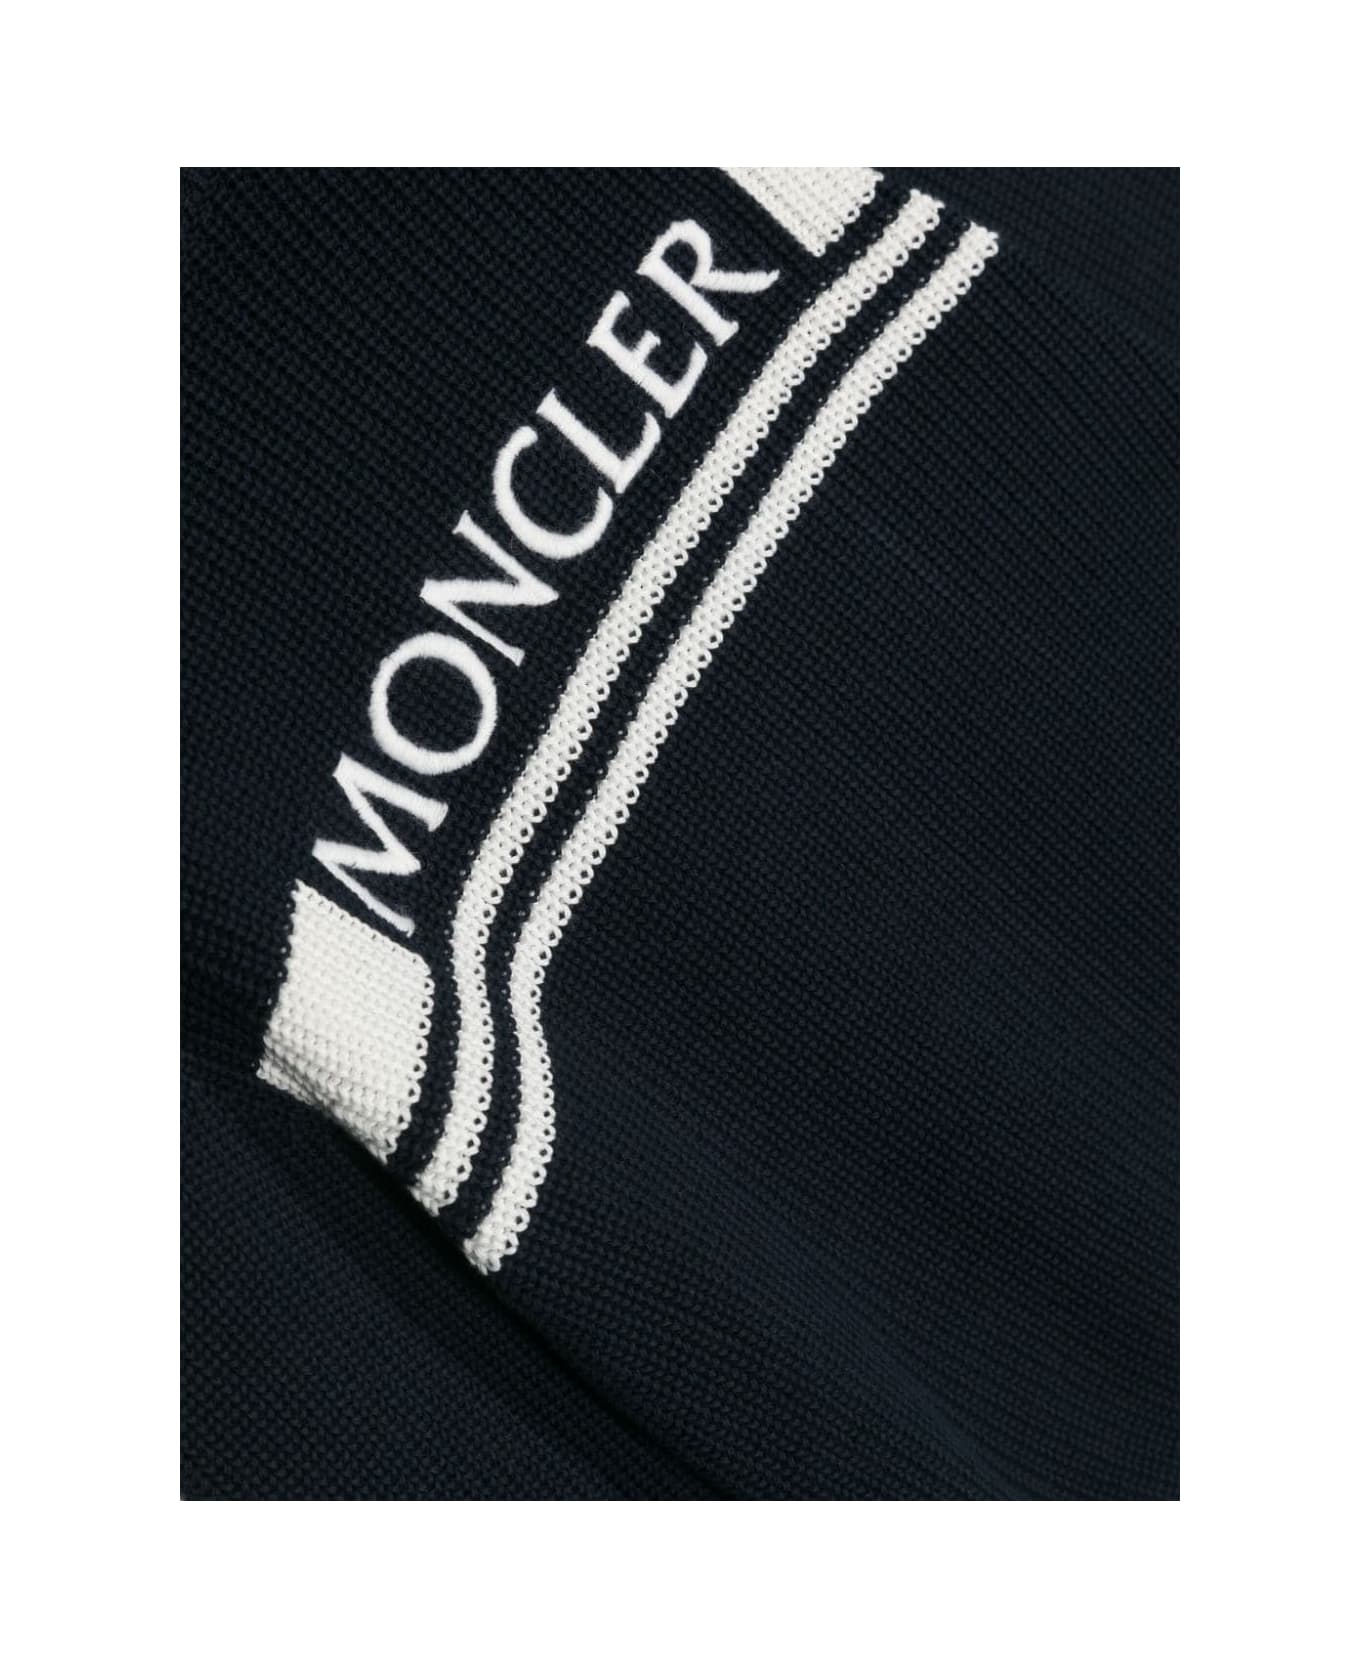 Moncler Cotton Logo Sweater In Blue - Blue